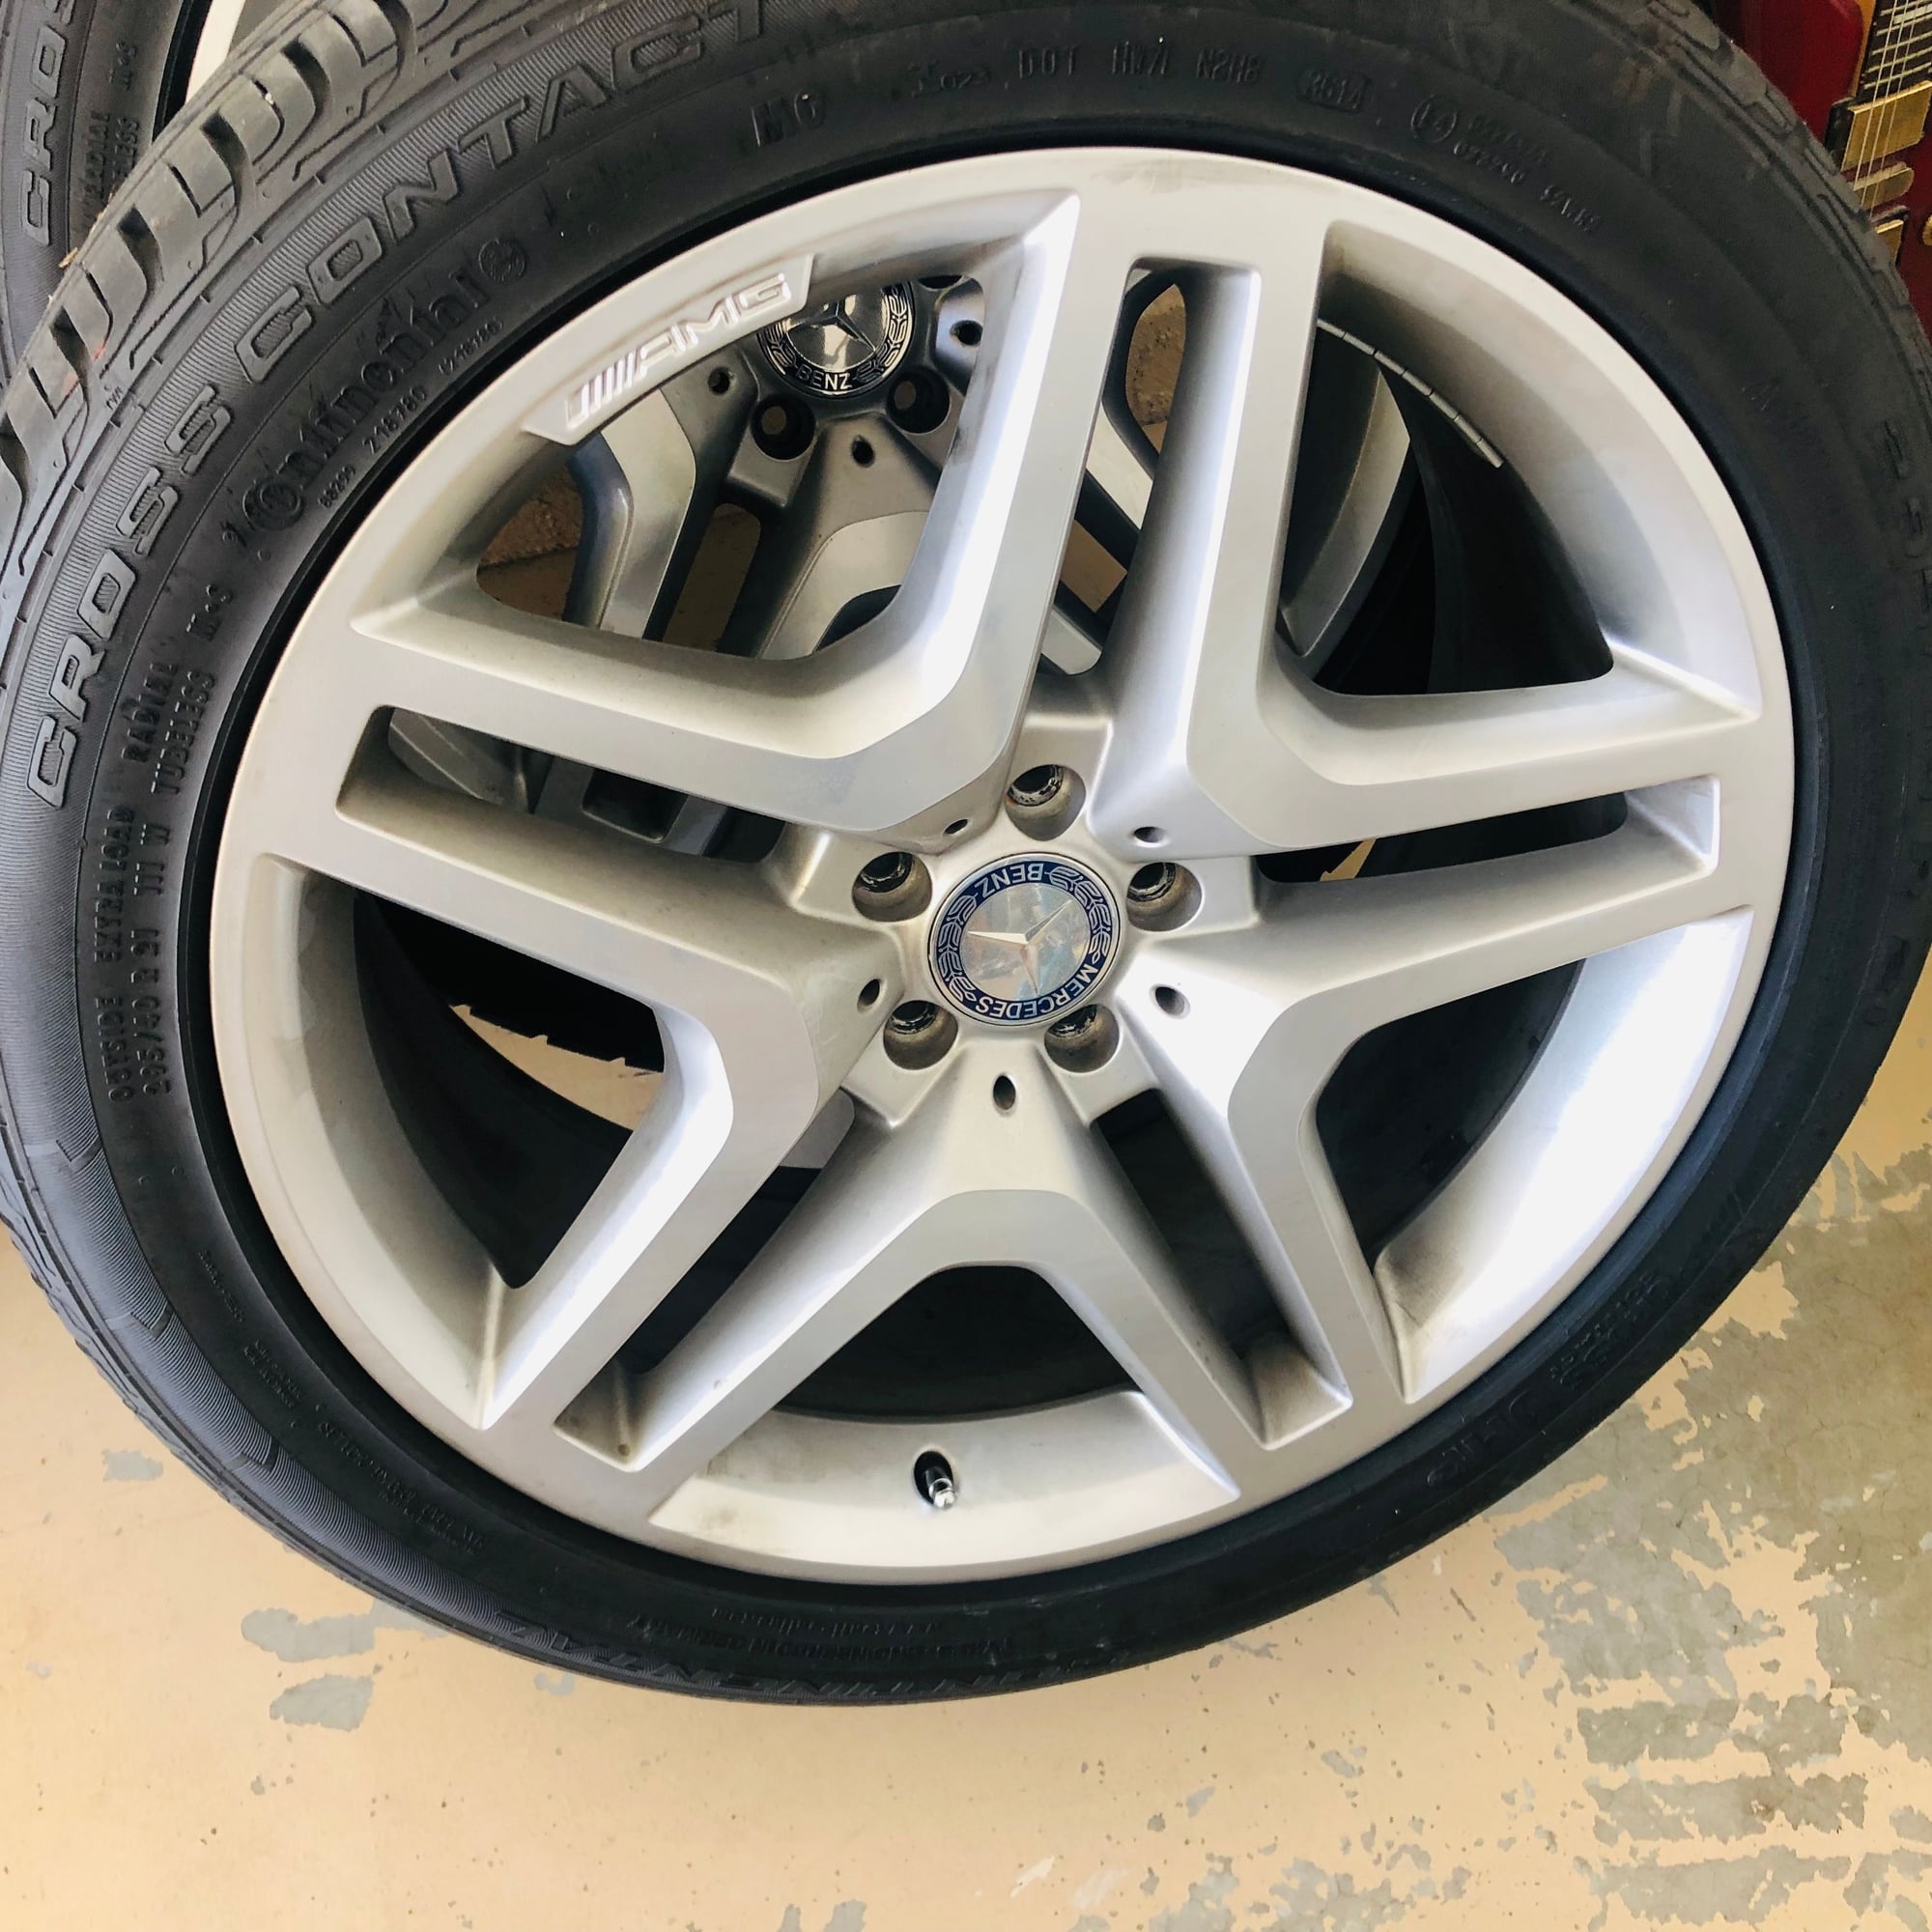 Wheels and Tires/Axles - 21"  GL 550 AMG WHEELS AND TIRES PERFECT CONDITION WITH TIRES 90% TREAD.  TAKE A LOOK - Used - All Years Mercedes-Benz GL550 - All Years Mercedes-Benz GLE350 - All Years Mercedes-Benz GLS450 - All Years Mercedes-Benz GLE300d - Irvine, CA 92618, United States